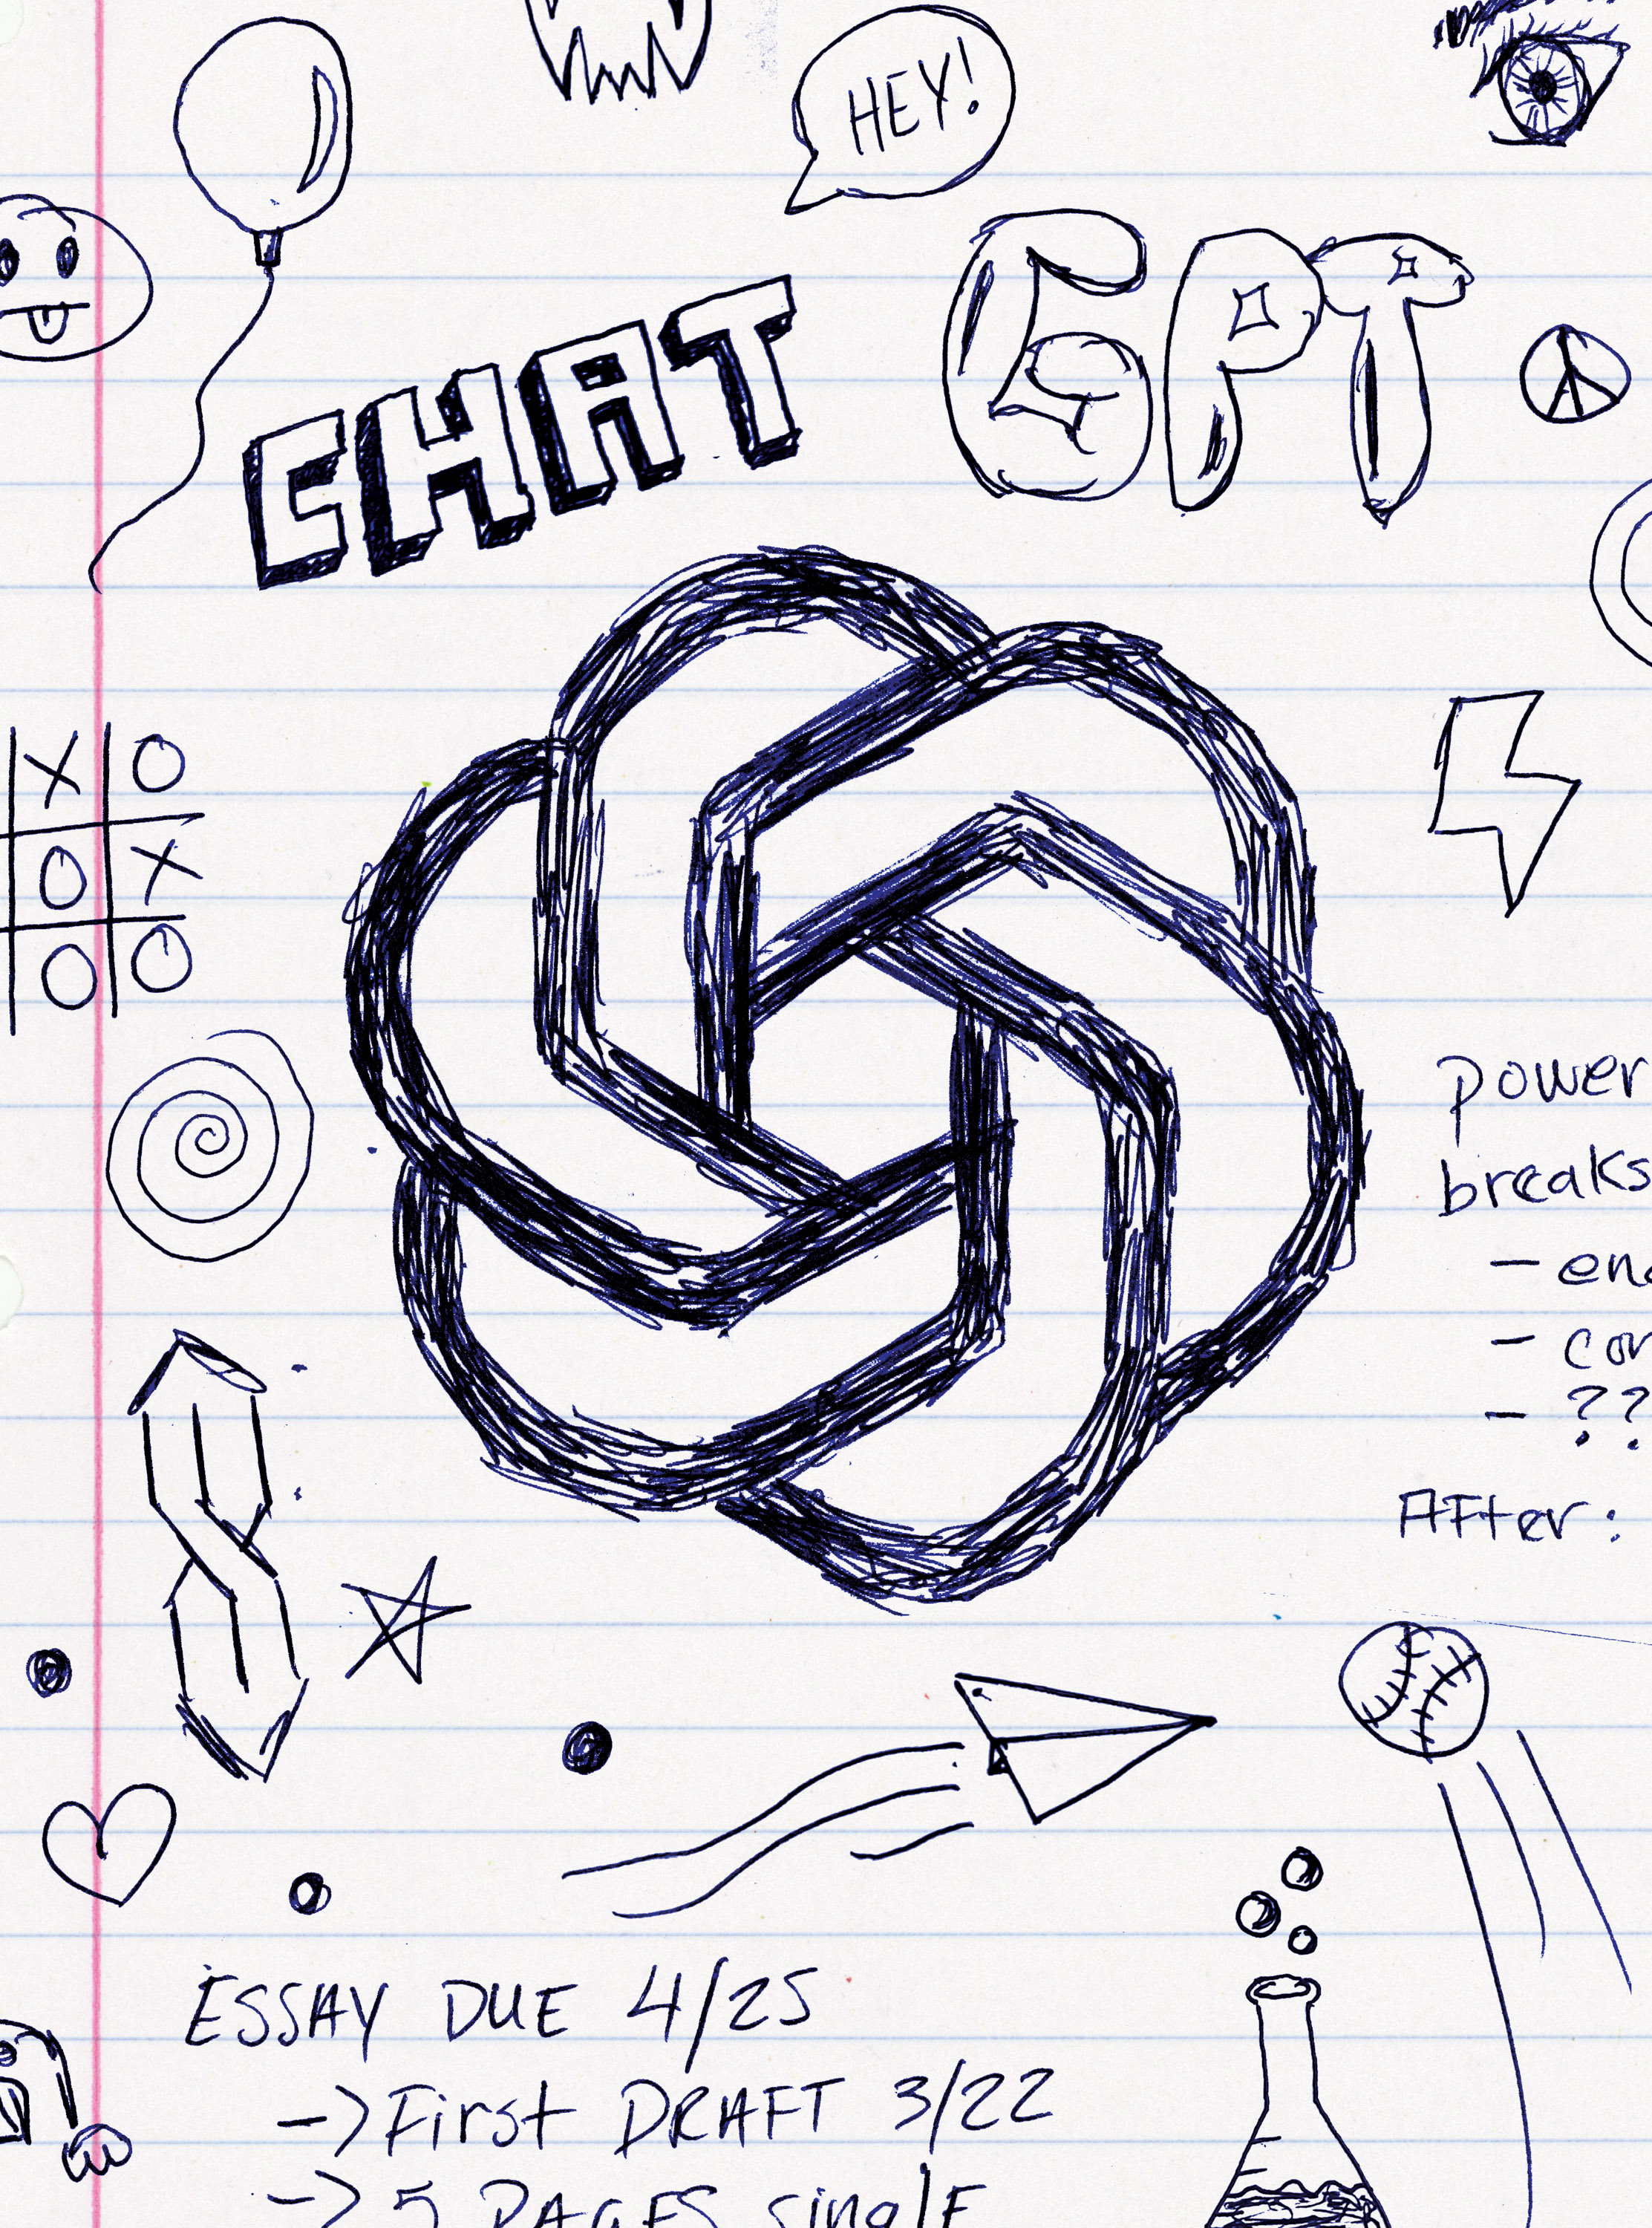 A ballpoint pen doodled OpenAi logo is in the center of a lined paper from a school notebook, surrounded by other doodles.